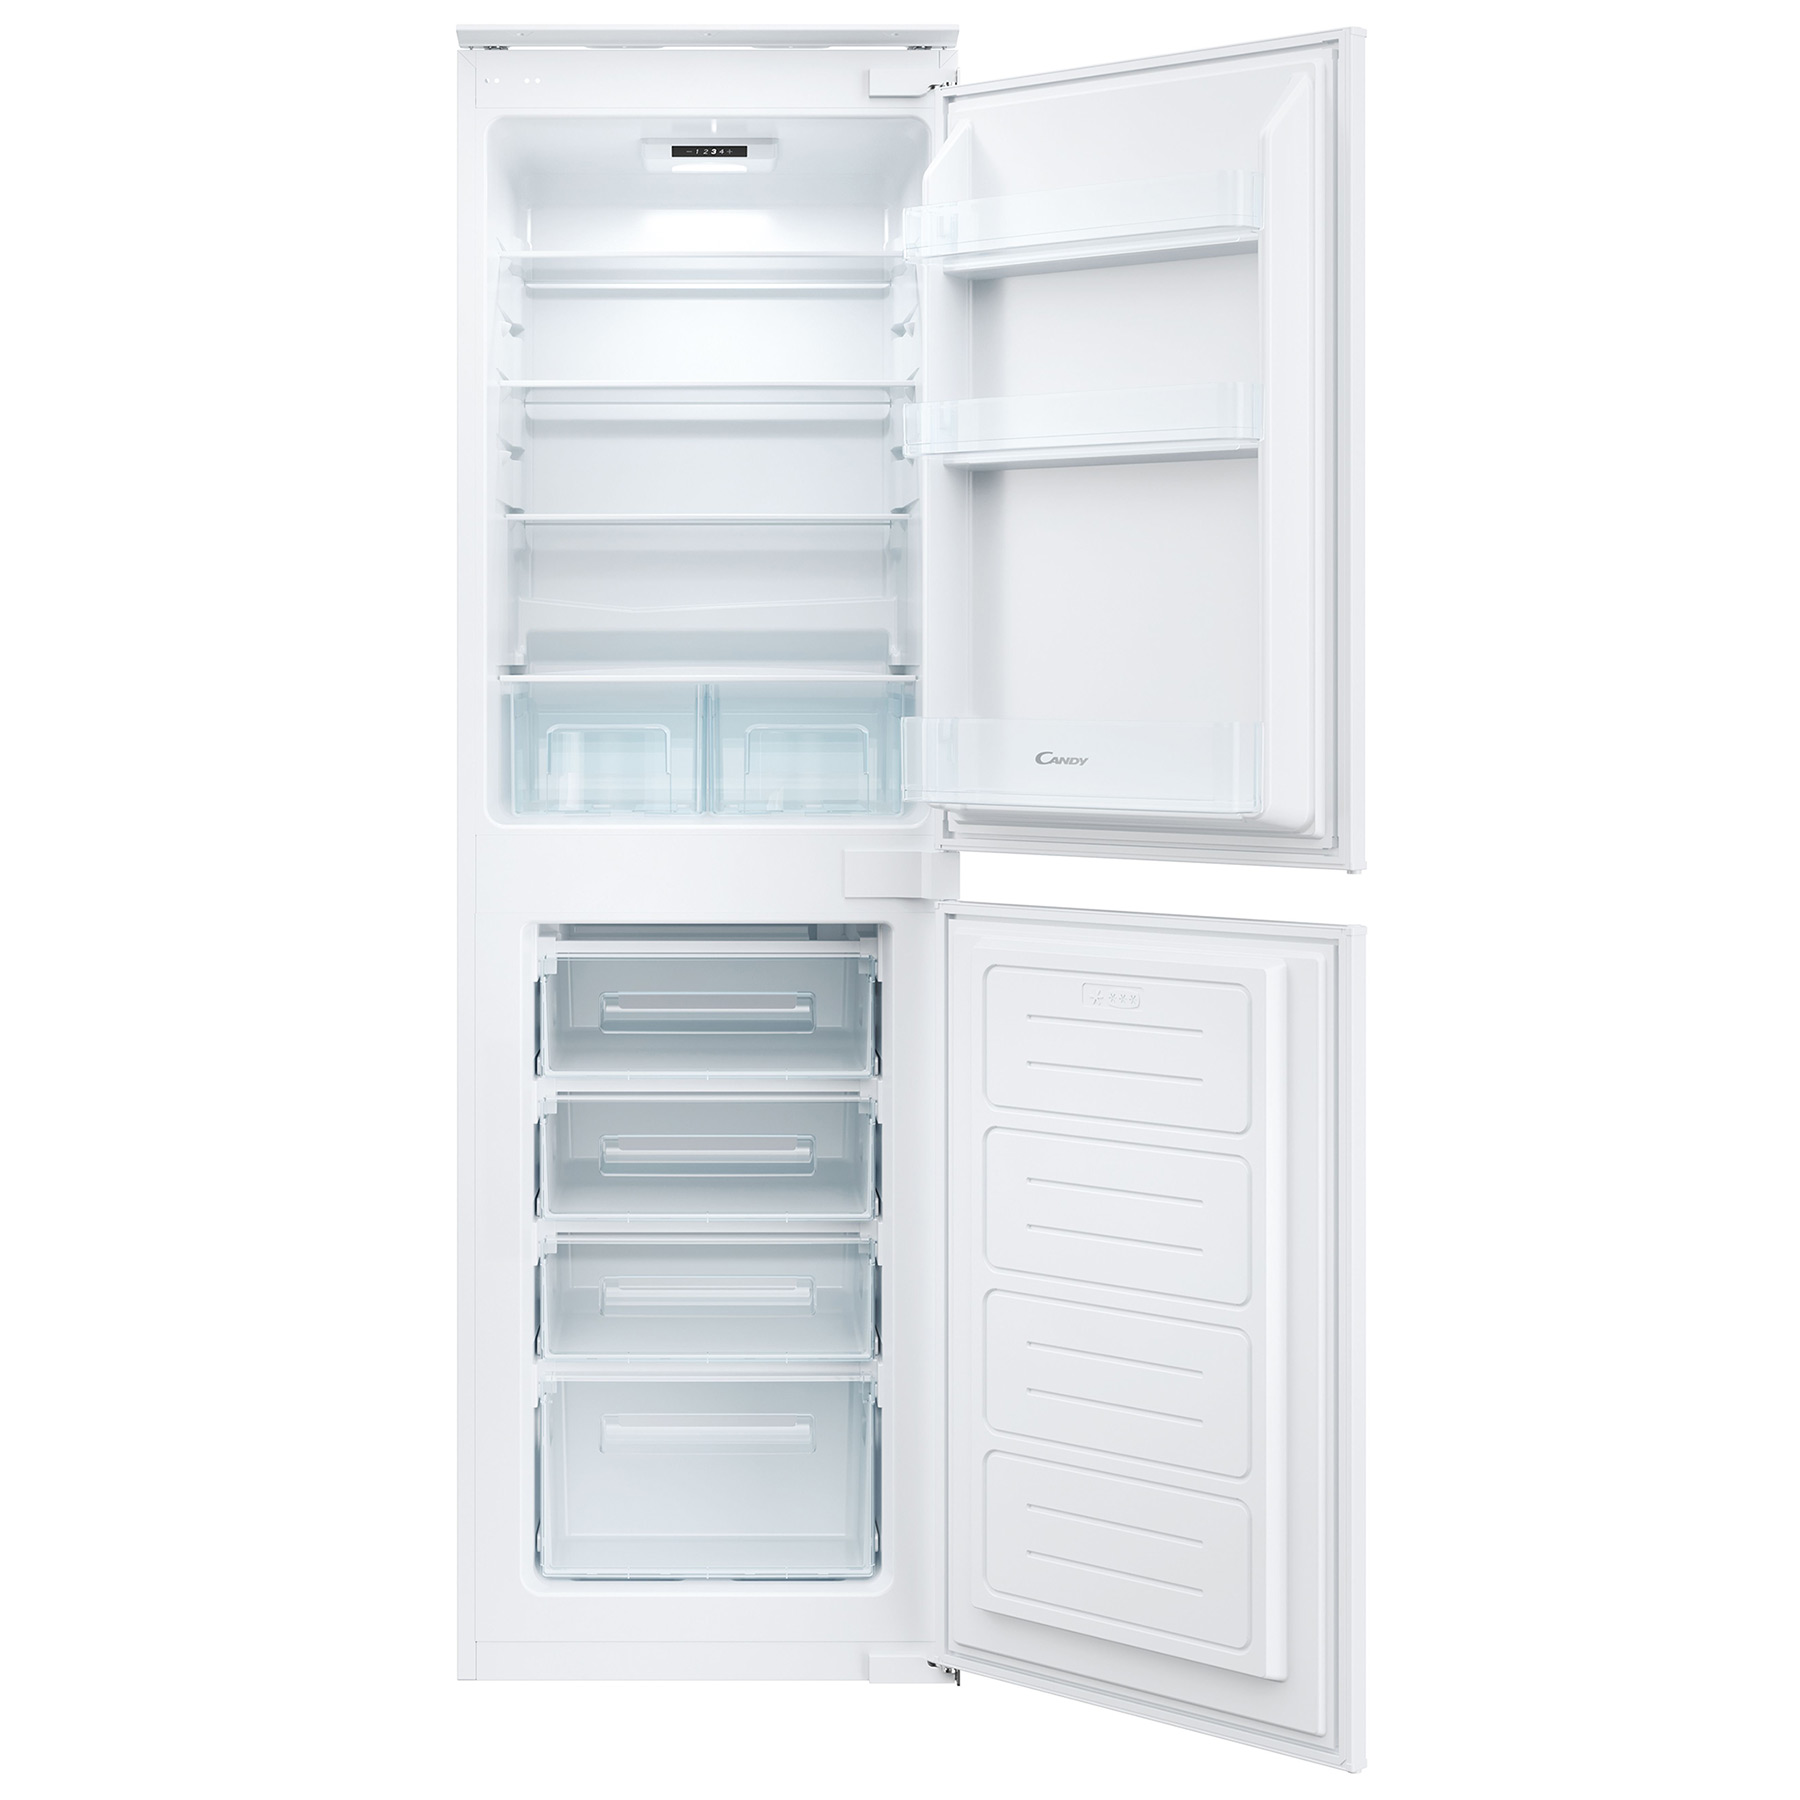 Image of Candy CBES50S518FK Integrated Fridge Freezer 50 50 1 77m F Rated